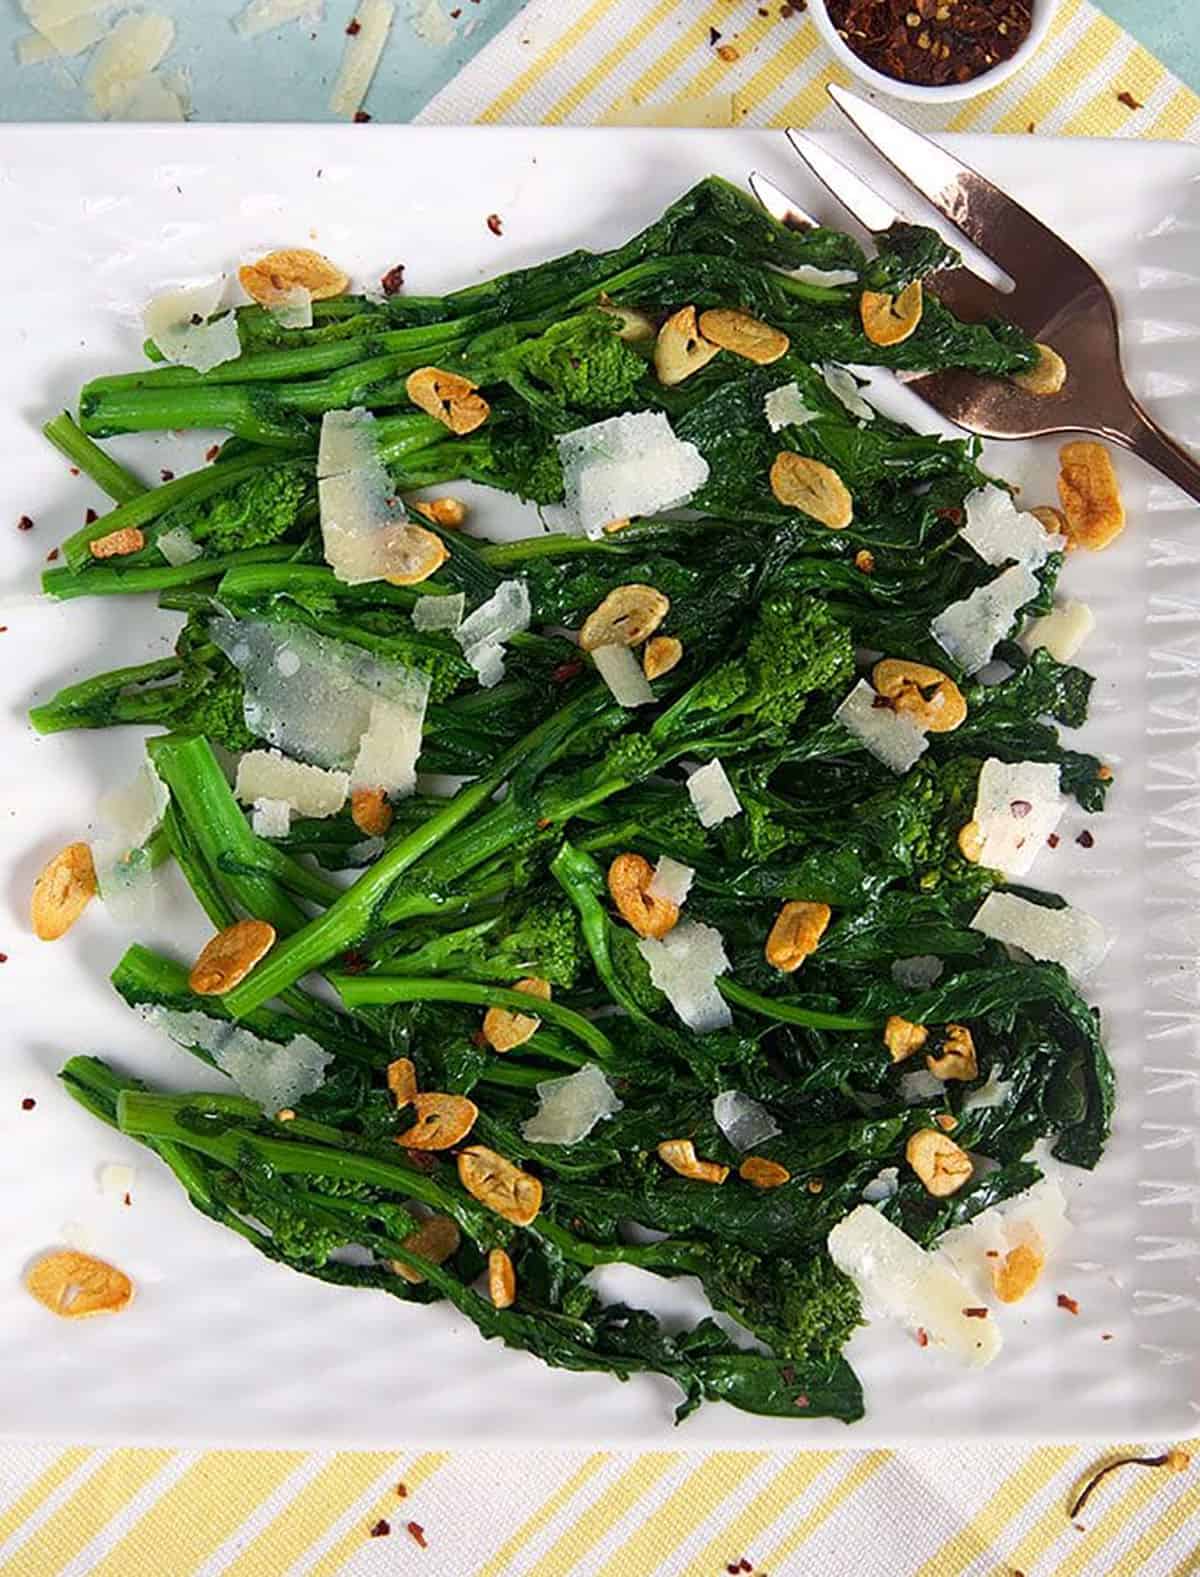 Broccoli rabe on a white square platter with crushed red pepper flakes in a bowl.